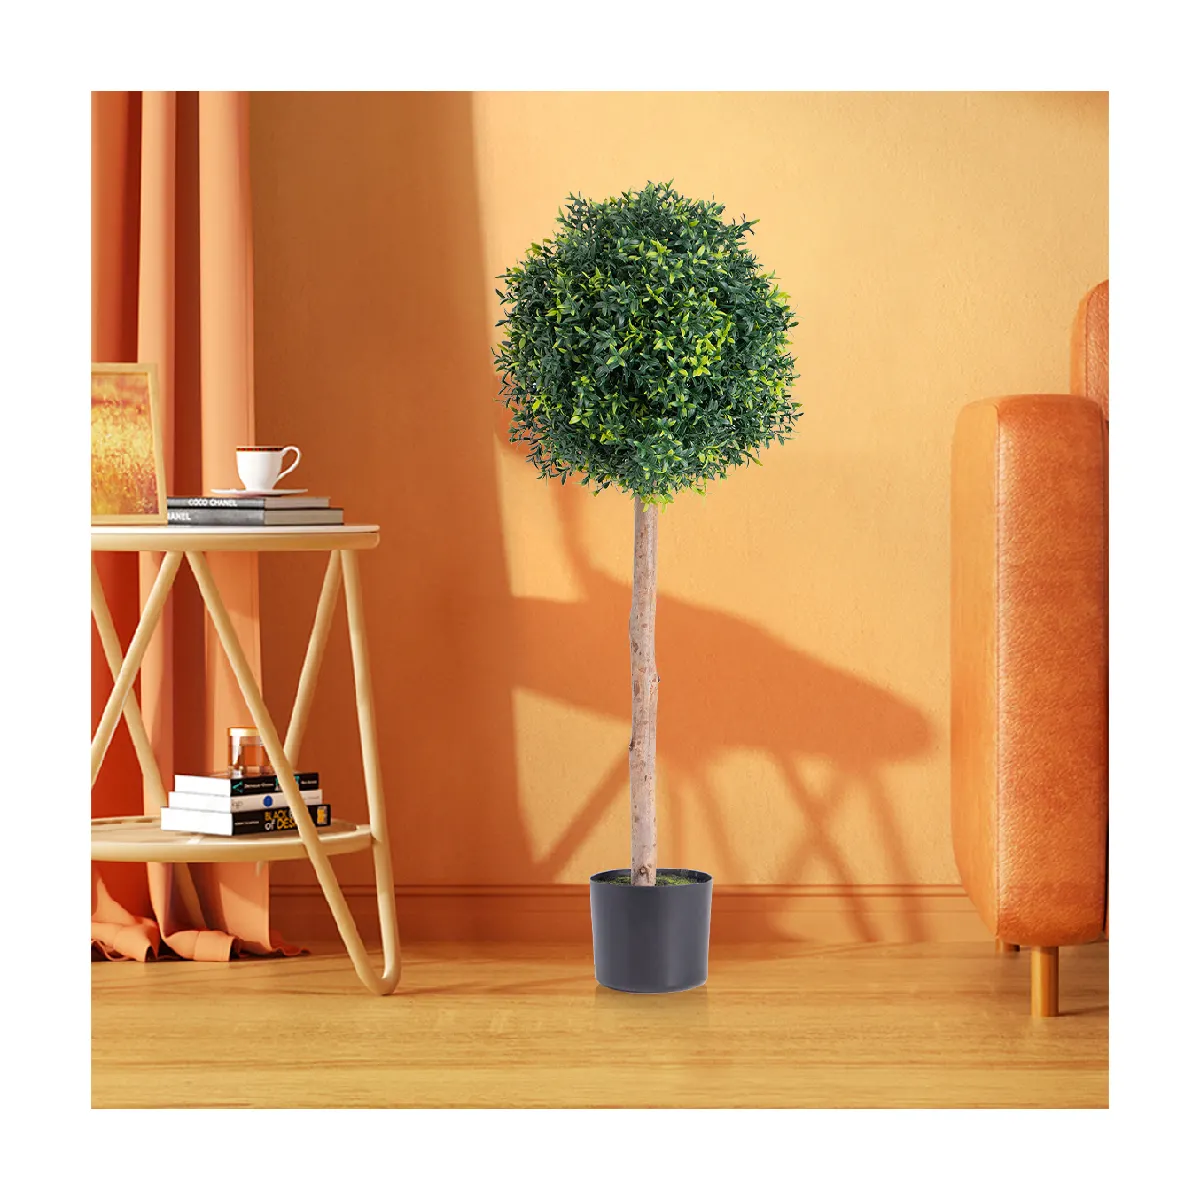 PZ-1-143 Hot Sale Lasting Evergreen Faked Plastic Leaf e Natural Wood Trunk Plant Topiary Artificial Green Potted Tree